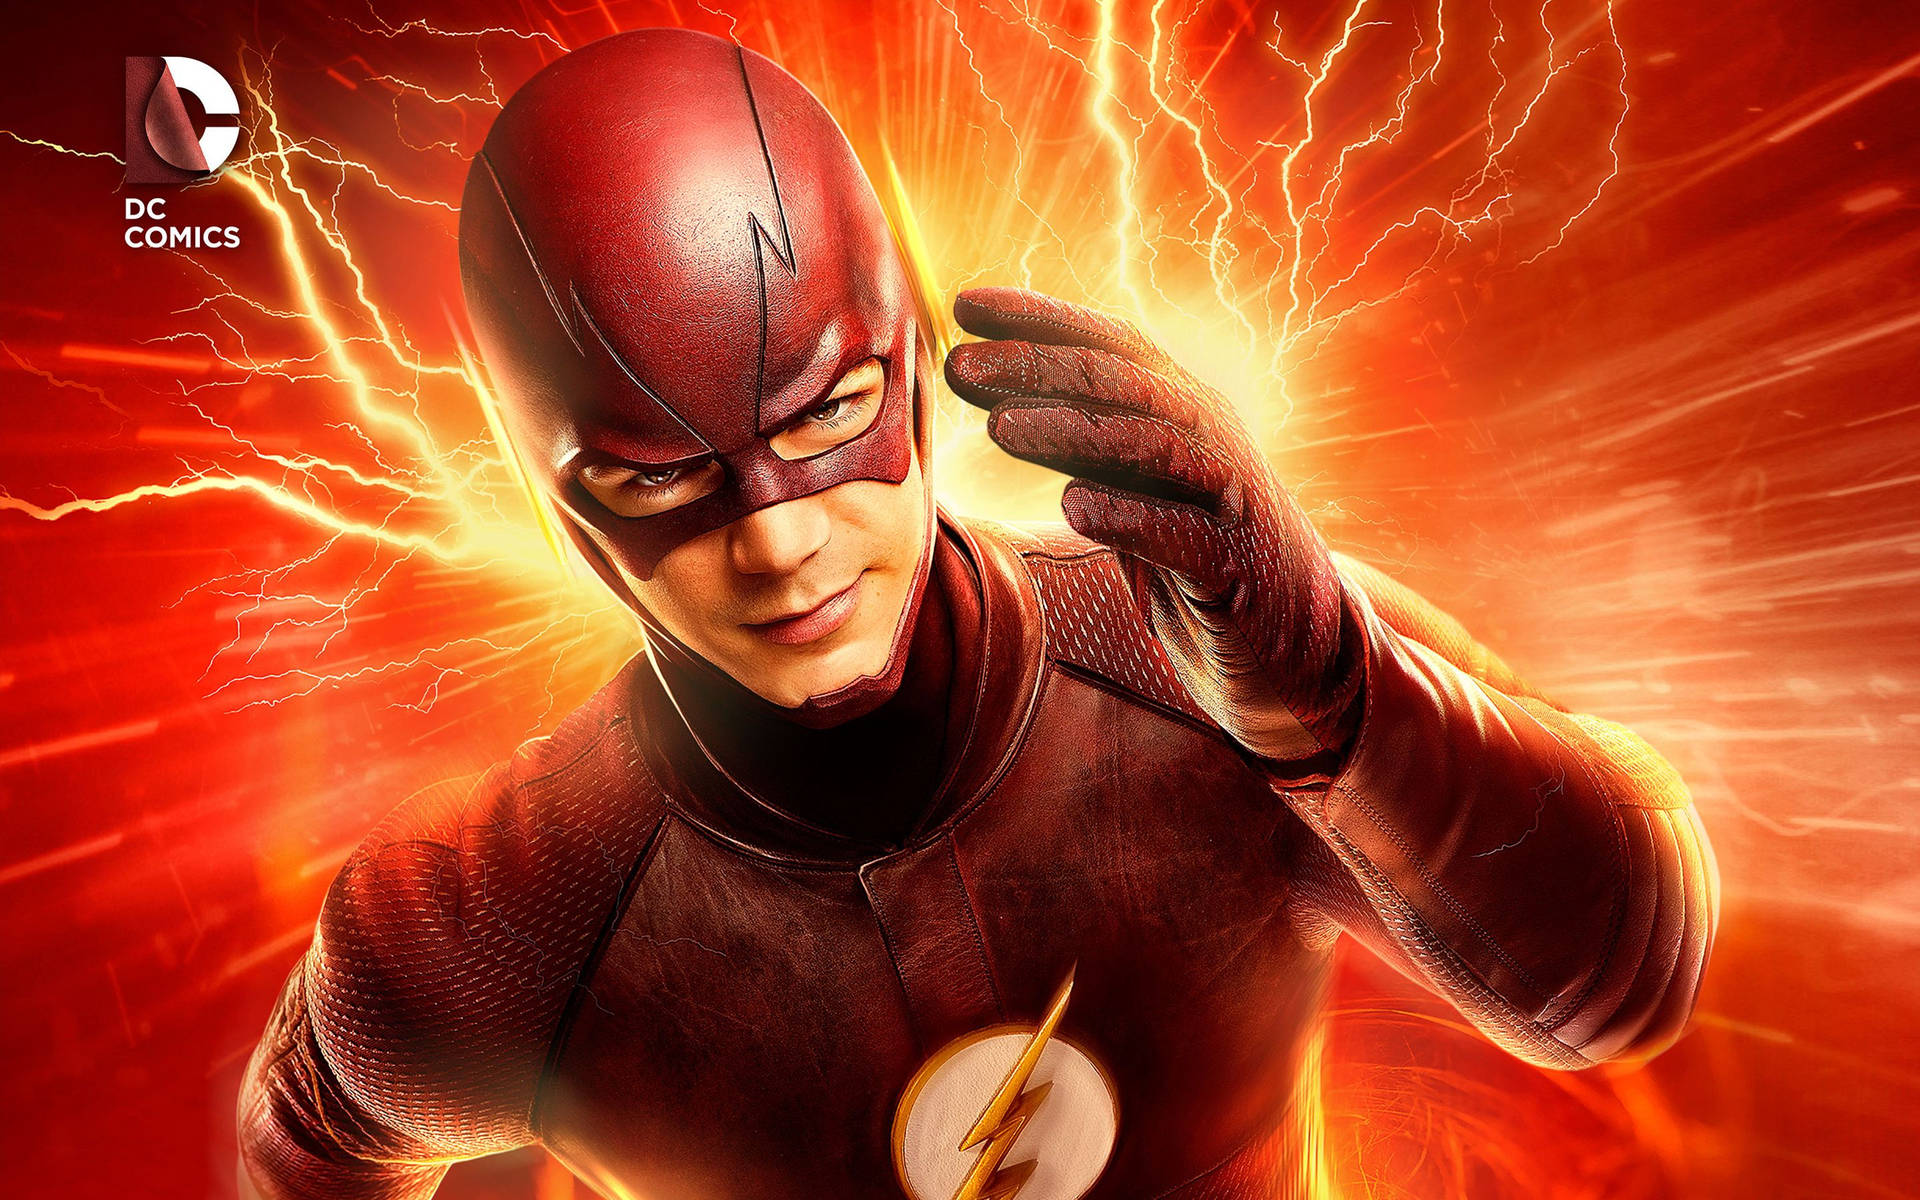 Free The Flash Wallpaper Downloads, [200+] The Flash Wallpapers for FREE |  